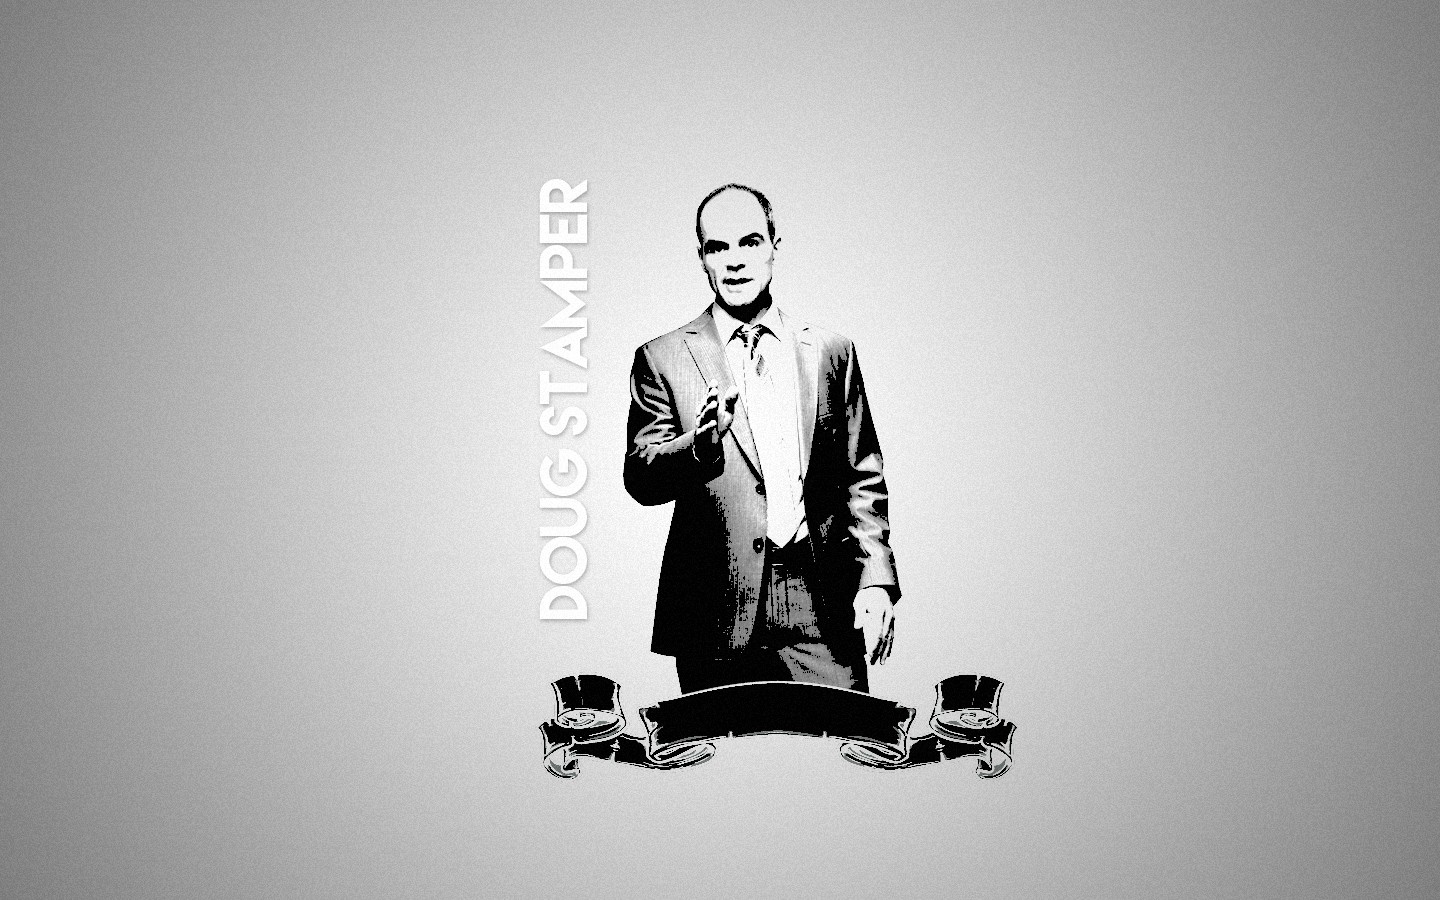 General 1440x900 Doug Stamper House of Cards men simple background TV series gray background gradient